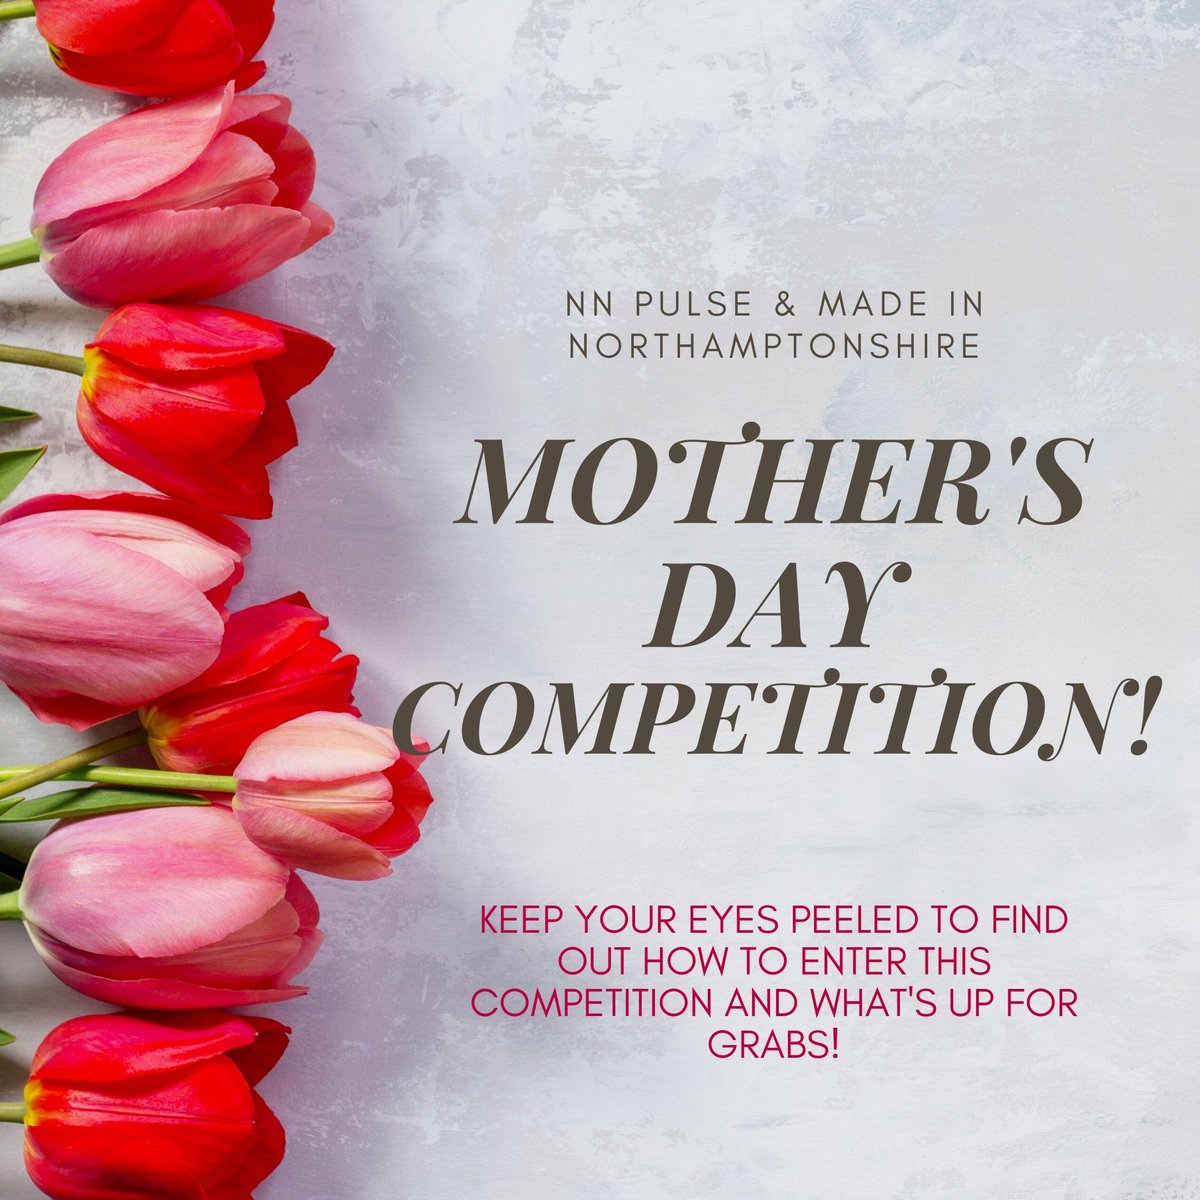 Back by popular demand 😀 We are teaming up with NN Pulse Magazine again to bring you another competition... for Mother's Day! Turn on our post notifications now so that you don't miss out!! 🌷